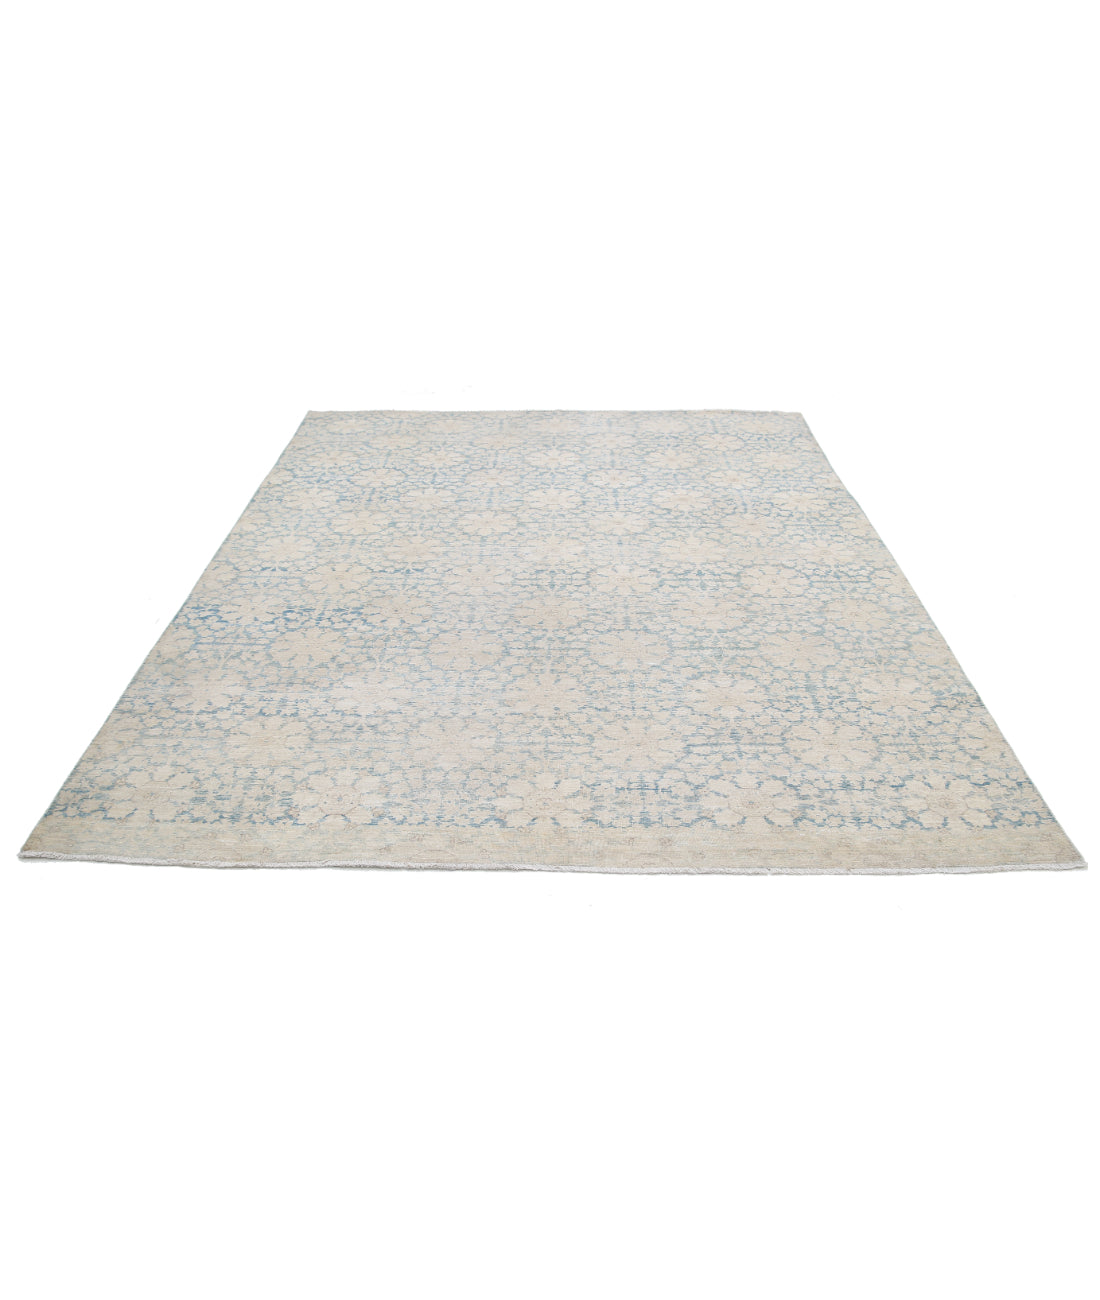 Hand Knotted Fine Artemix Wool Rug - 7'9'' x 9'7'' 7'9'' x 9'7'' (233 X 288) / Blue / Ivory